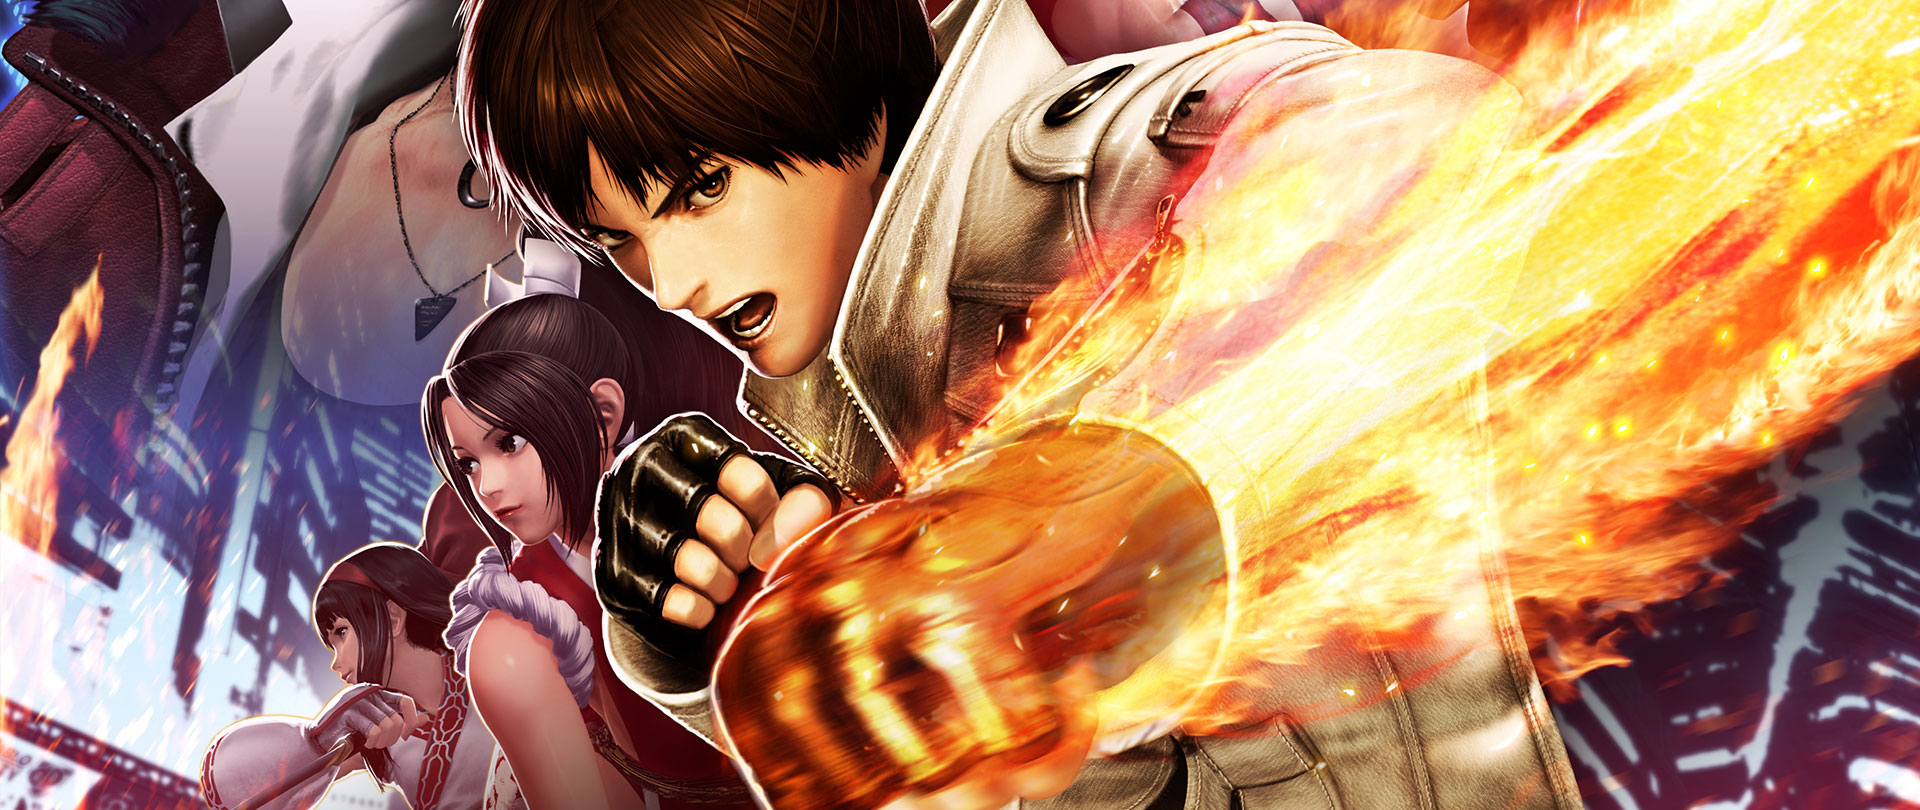 The King Of Fighters 10 in 1 collection [1080p 60fps] 